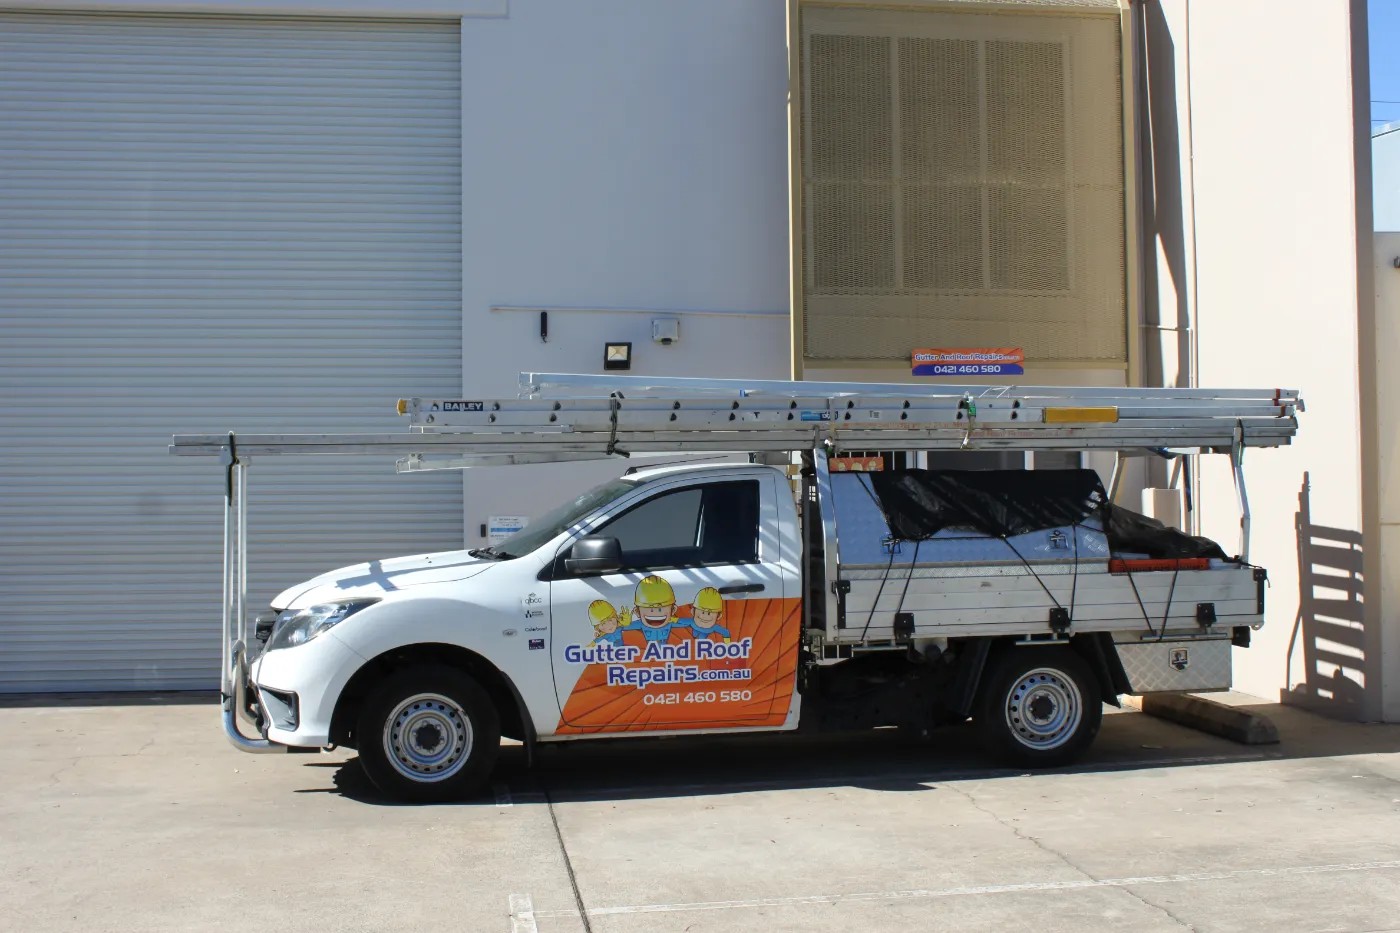 Gutter and Roof Repairs branded ute with ladder attached.